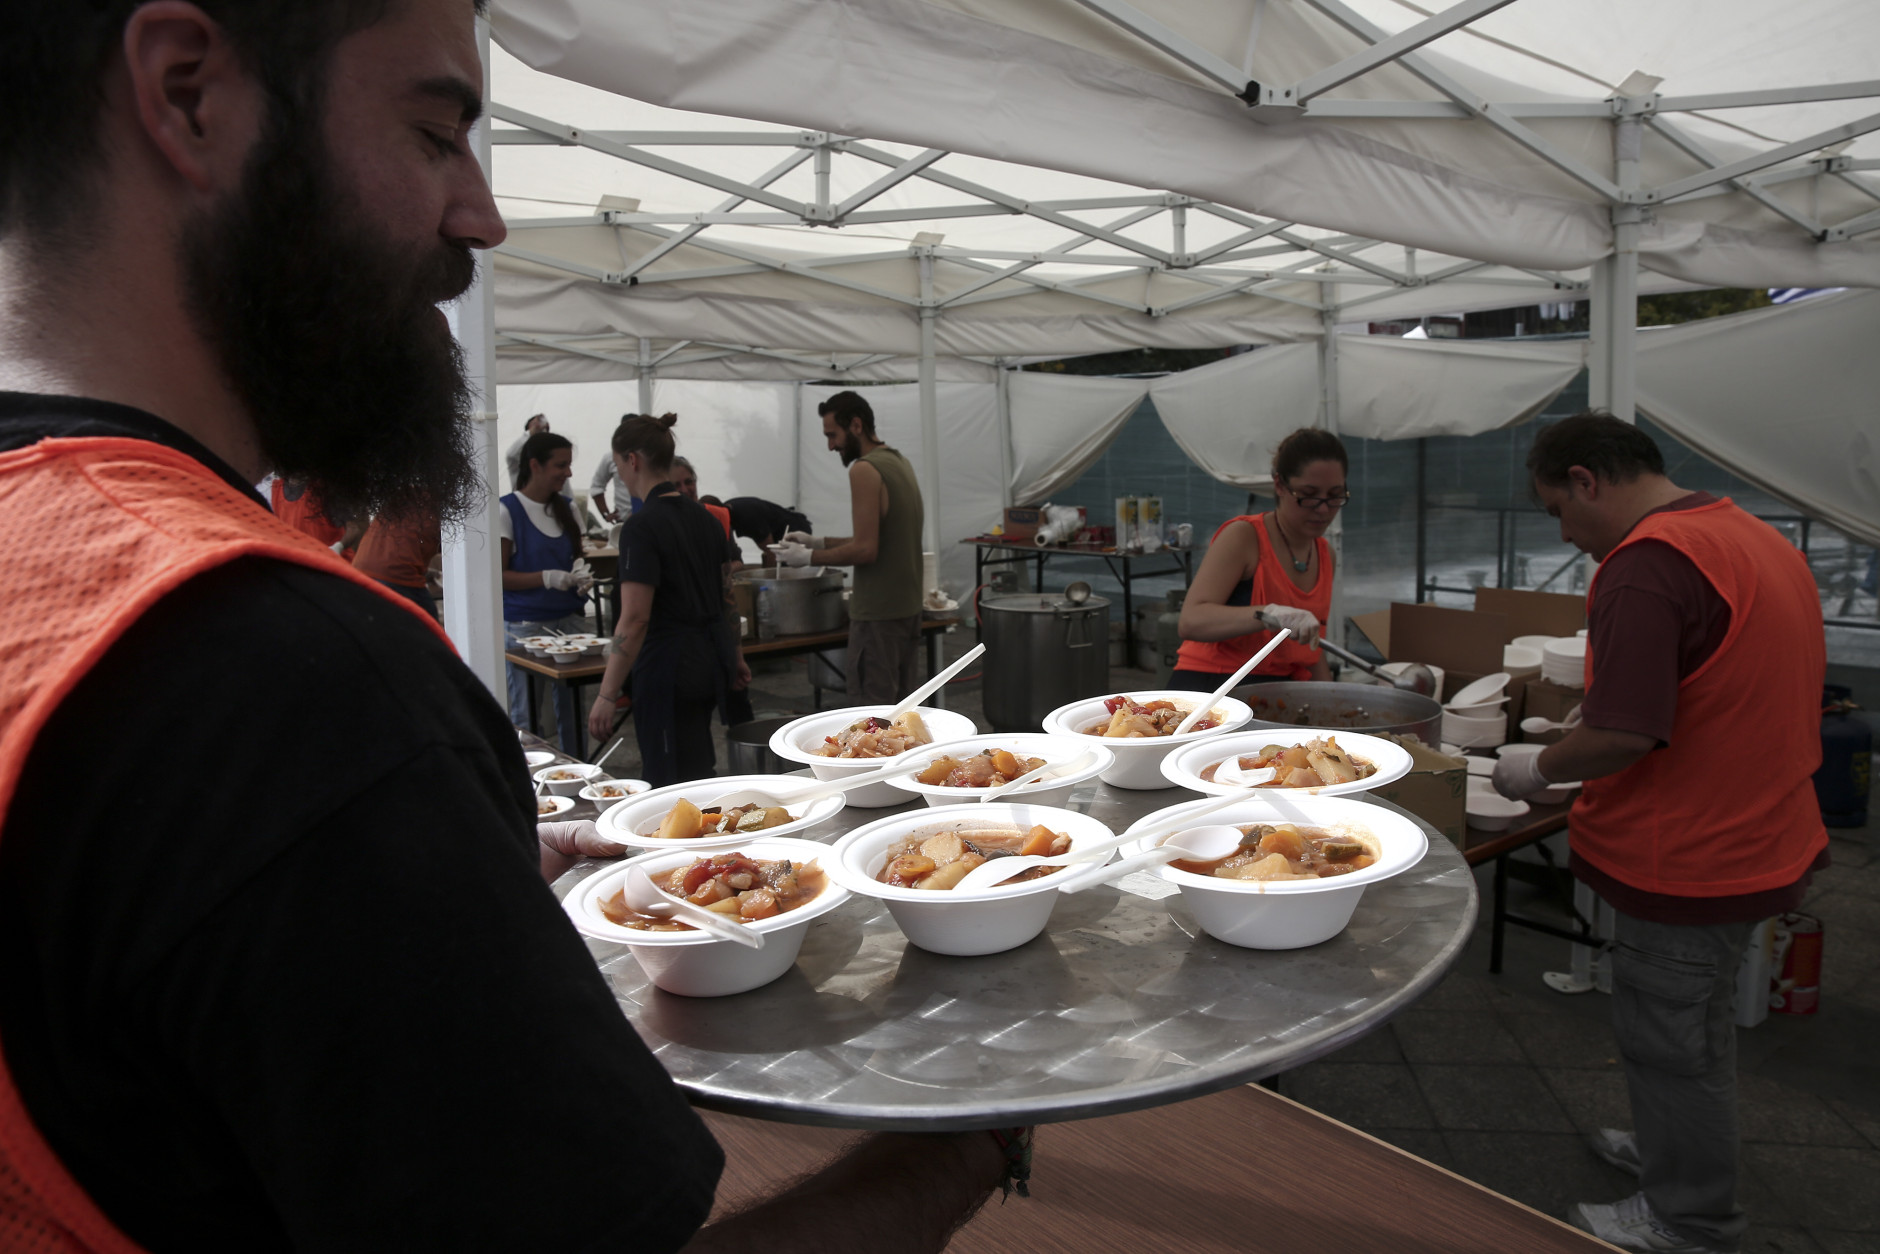 A volunteer serves meals cooked with 'wasted' produce deemed unsuitable by food stores because of their appearance, in Athens, Greece, Sunday Oct. 11, 2015. The event was part of the 'Feeding5000' campaign which aims to highlight the waste of foodstuff in advanced societies.   (AP Photo/Yorgos Karahalis)